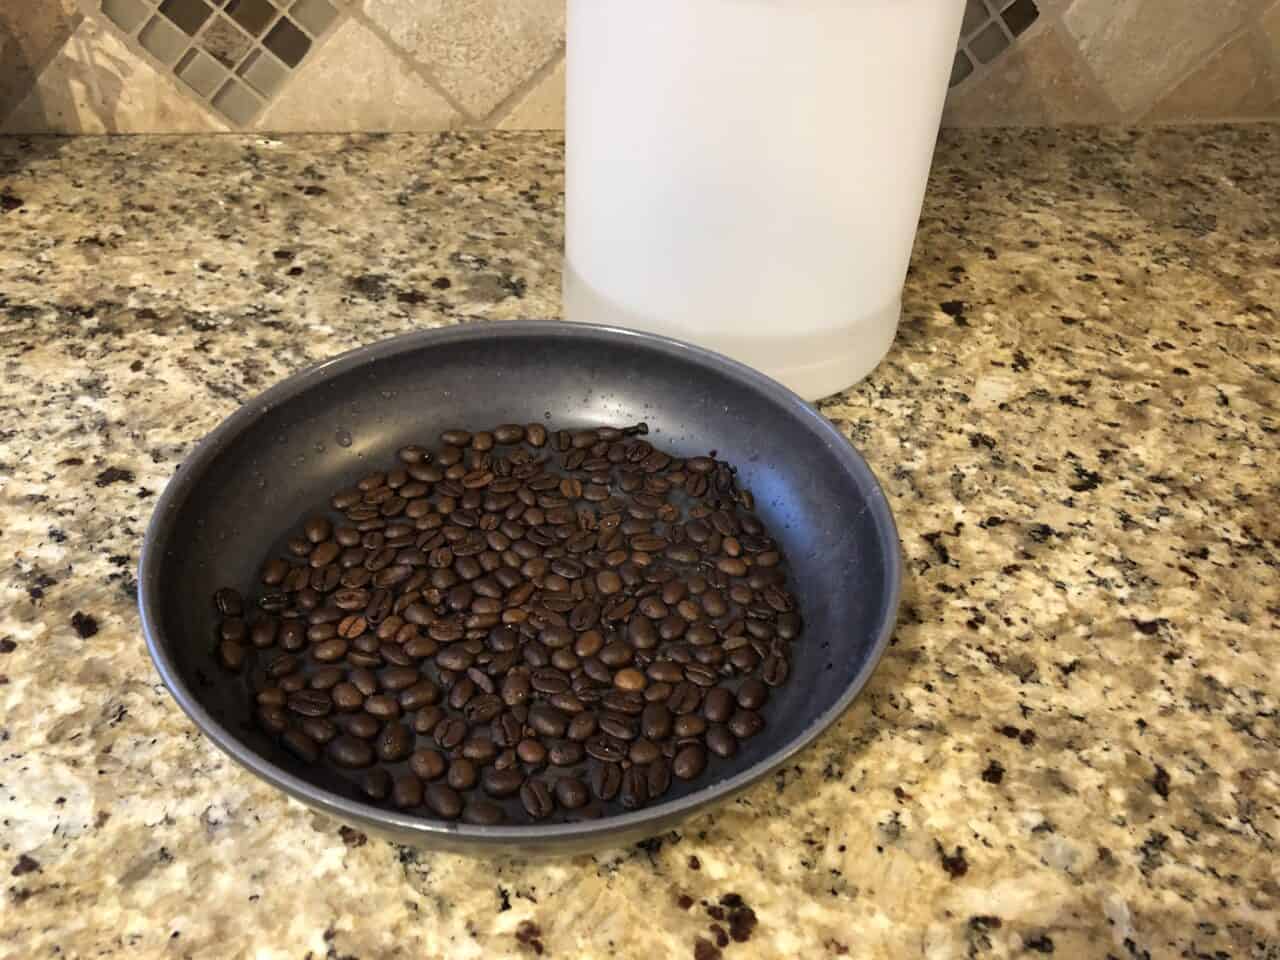 removing mold off of coffee beans with vinegar 